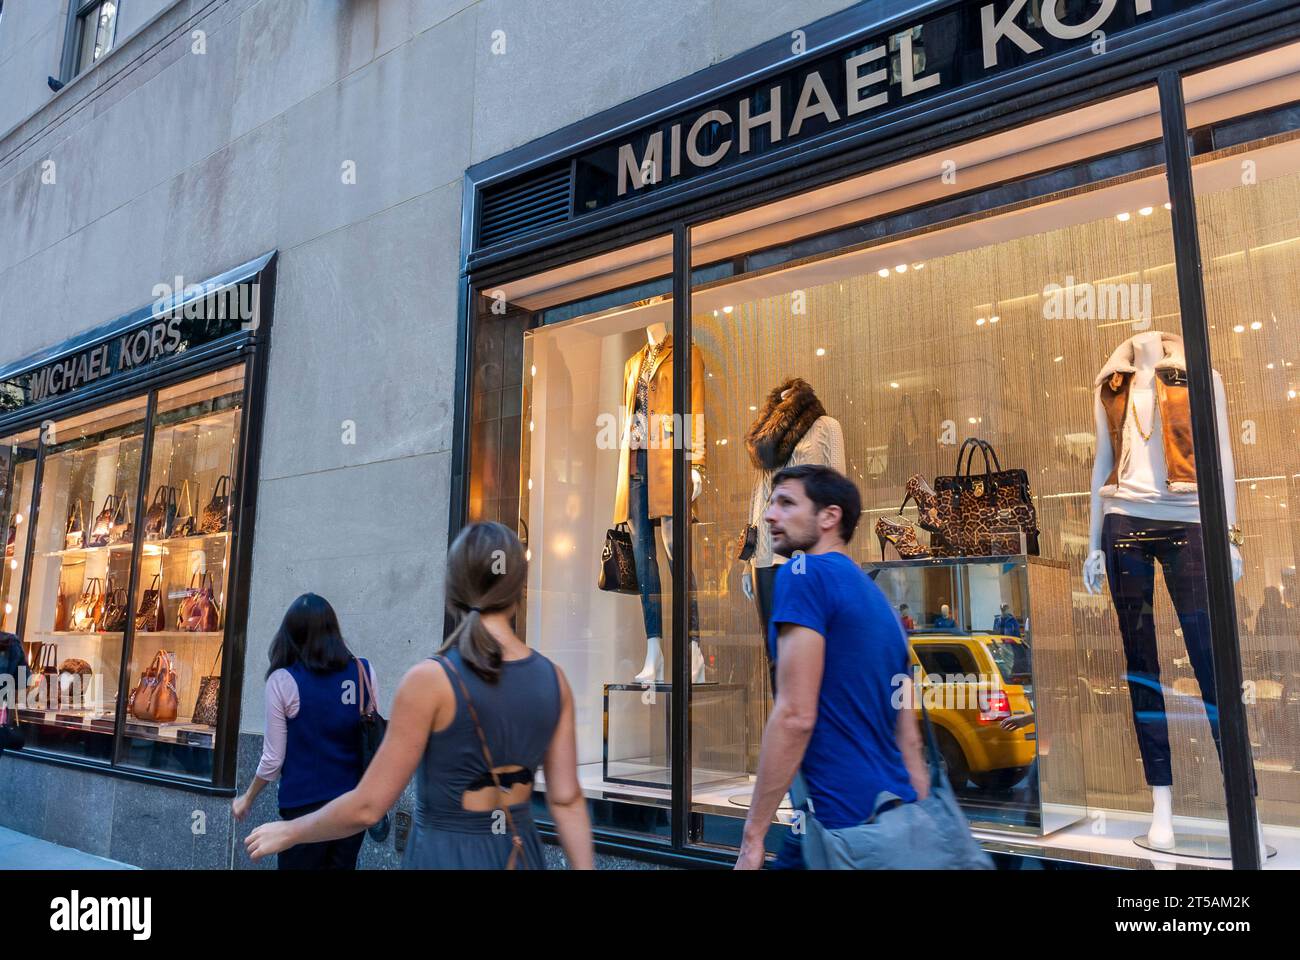 New York City, NY, USA, Michael Kors, Luxury Fashion Store Front, Fifth Ave., WIndow Display, Women's Bags Stock Photo